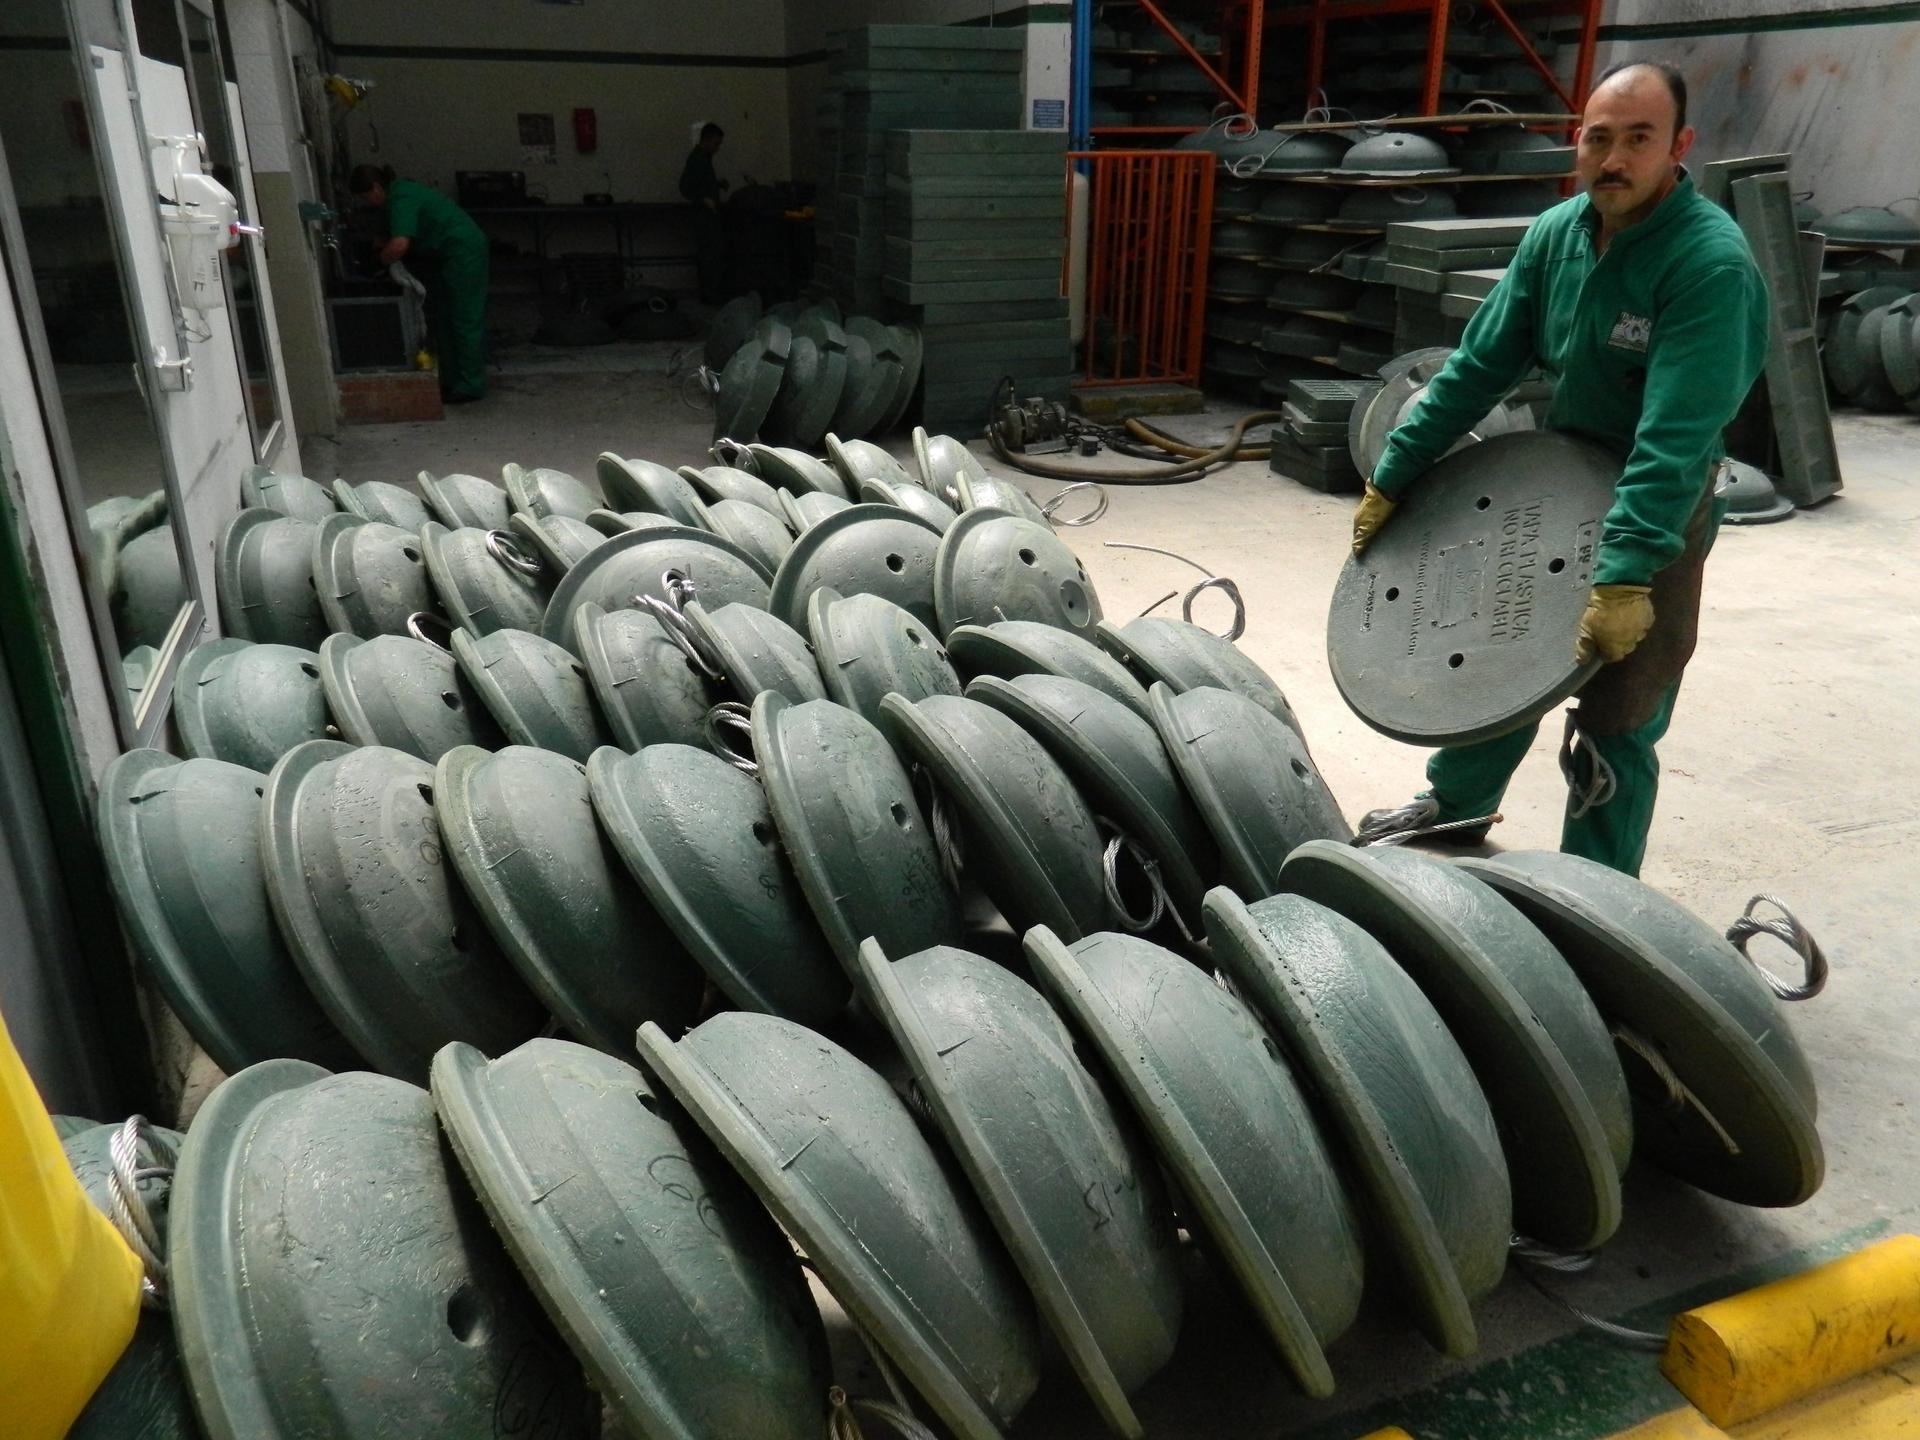 A worker at Maderplast in Bogota stacks plastic manhole covers.  They're designed to replace the thousands of metal covers that thieves have been stealing to sell as scrap metal.